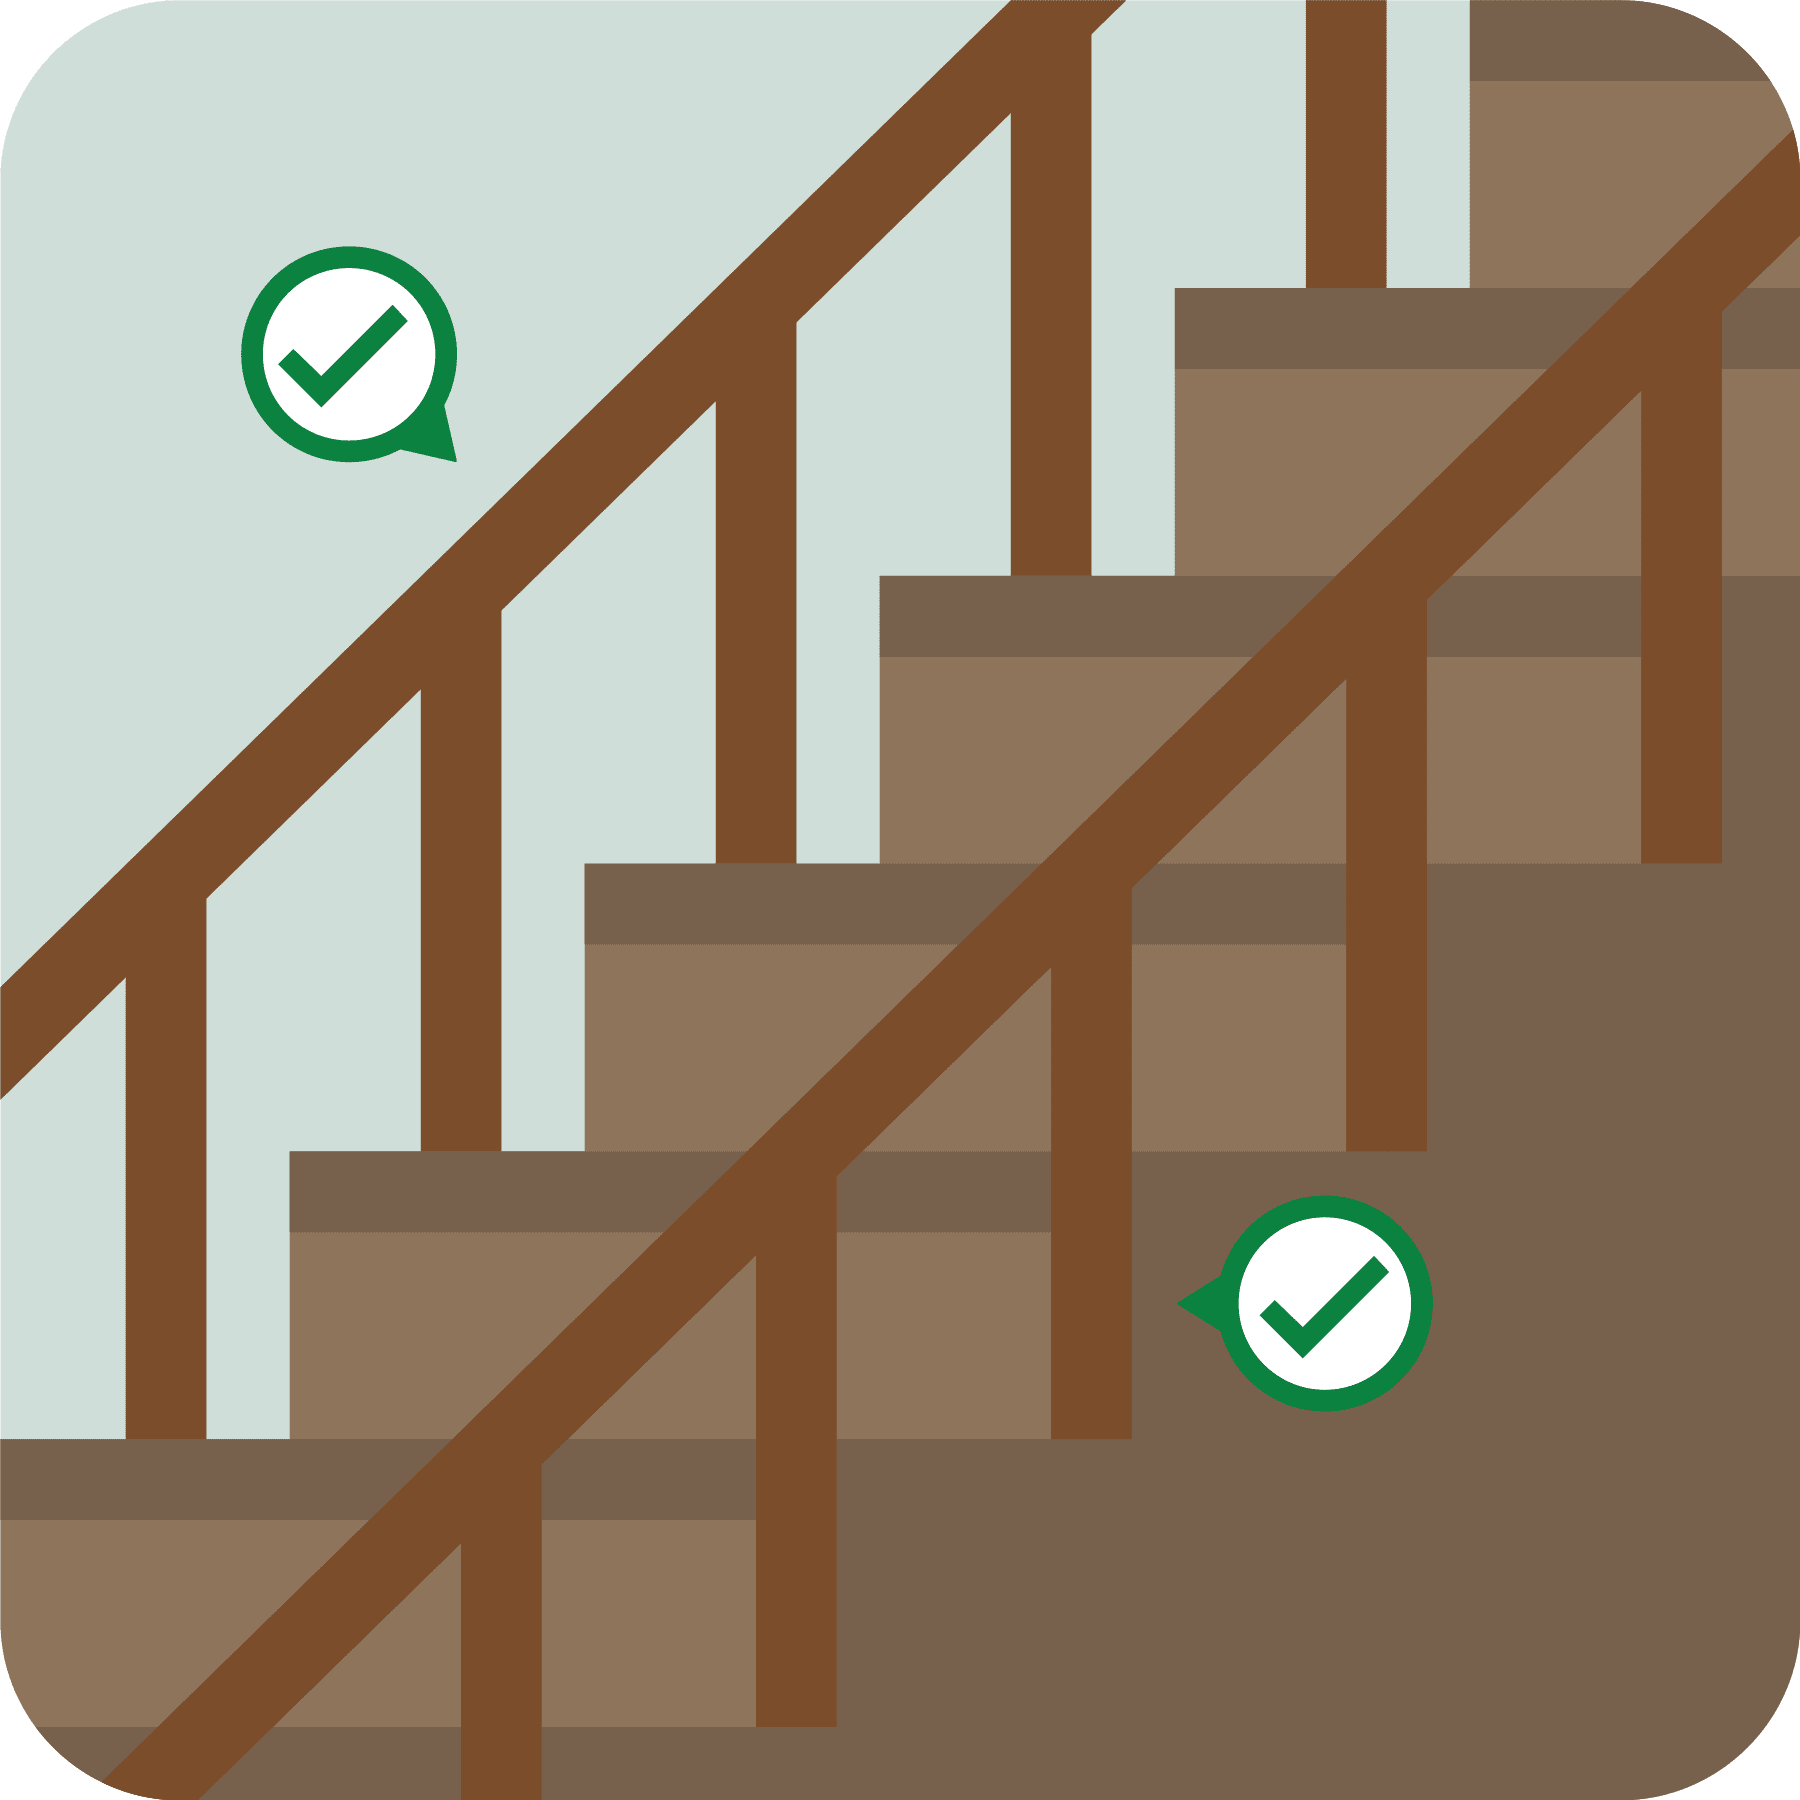 A stairway with handrails on both sides. A green checkmark is shown.